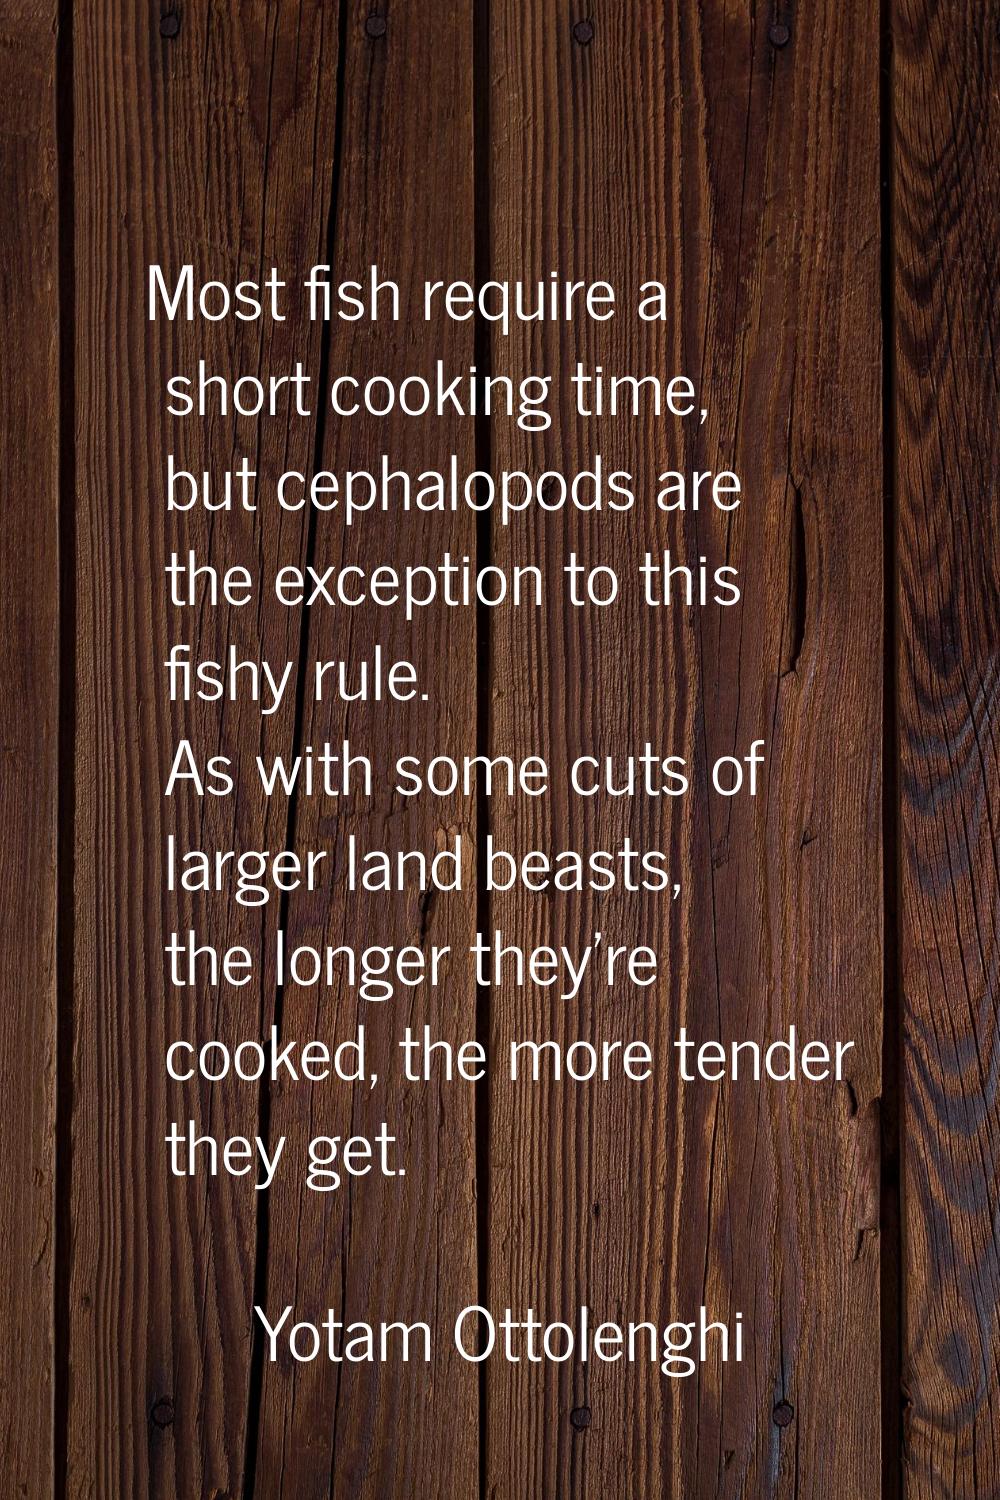 Most fish require a short cooking time, but cephalopods are the exception to this fishy rule. As wi